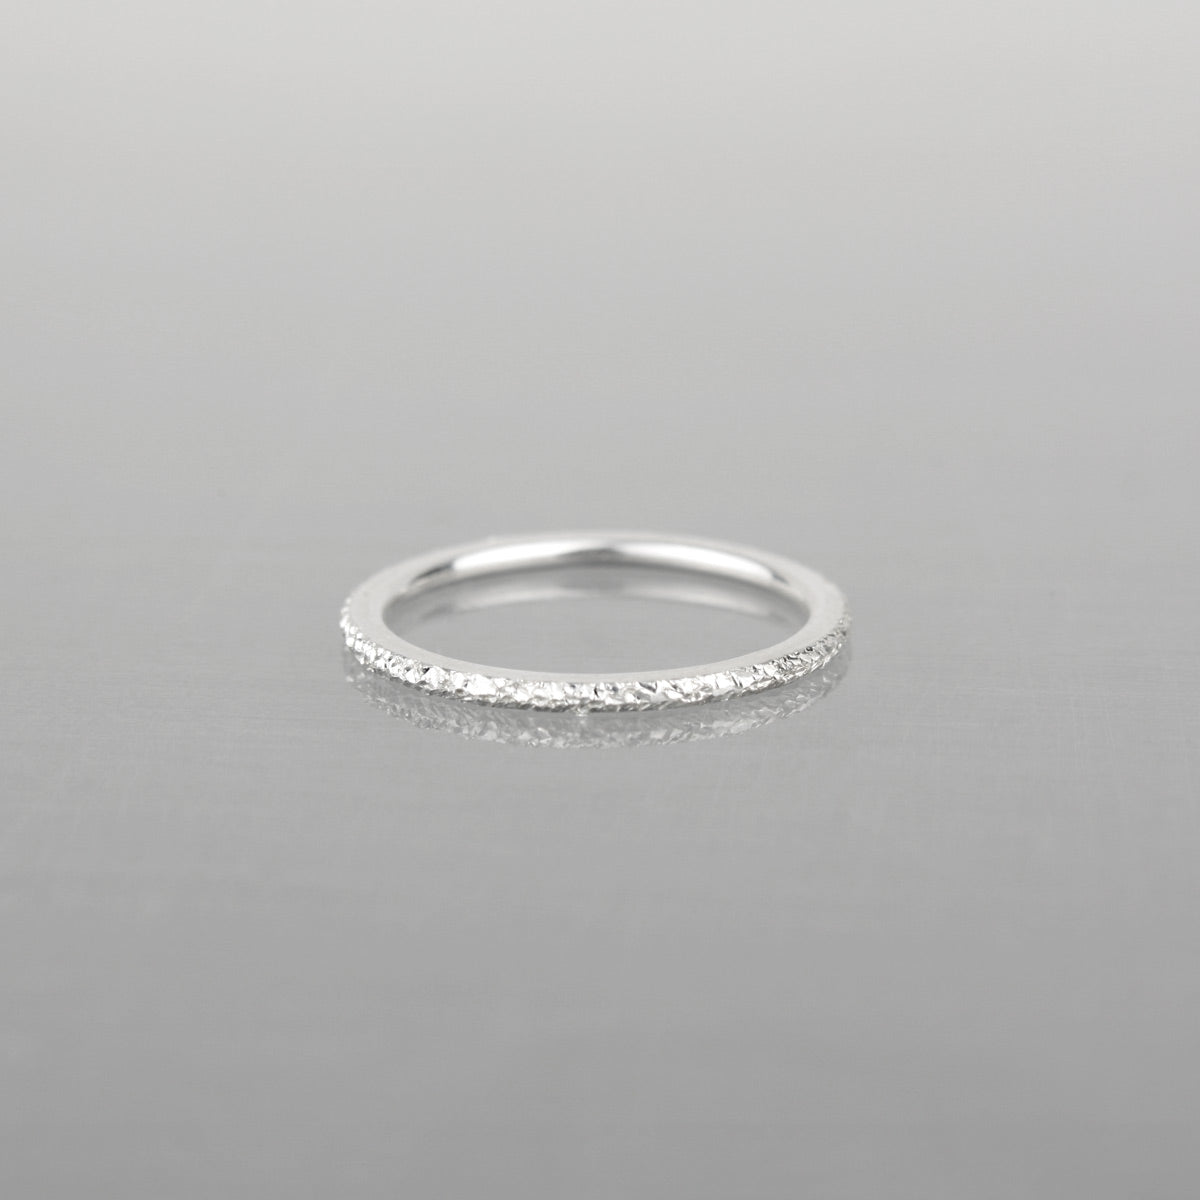 Silver Sparkle Ring - Single Ring